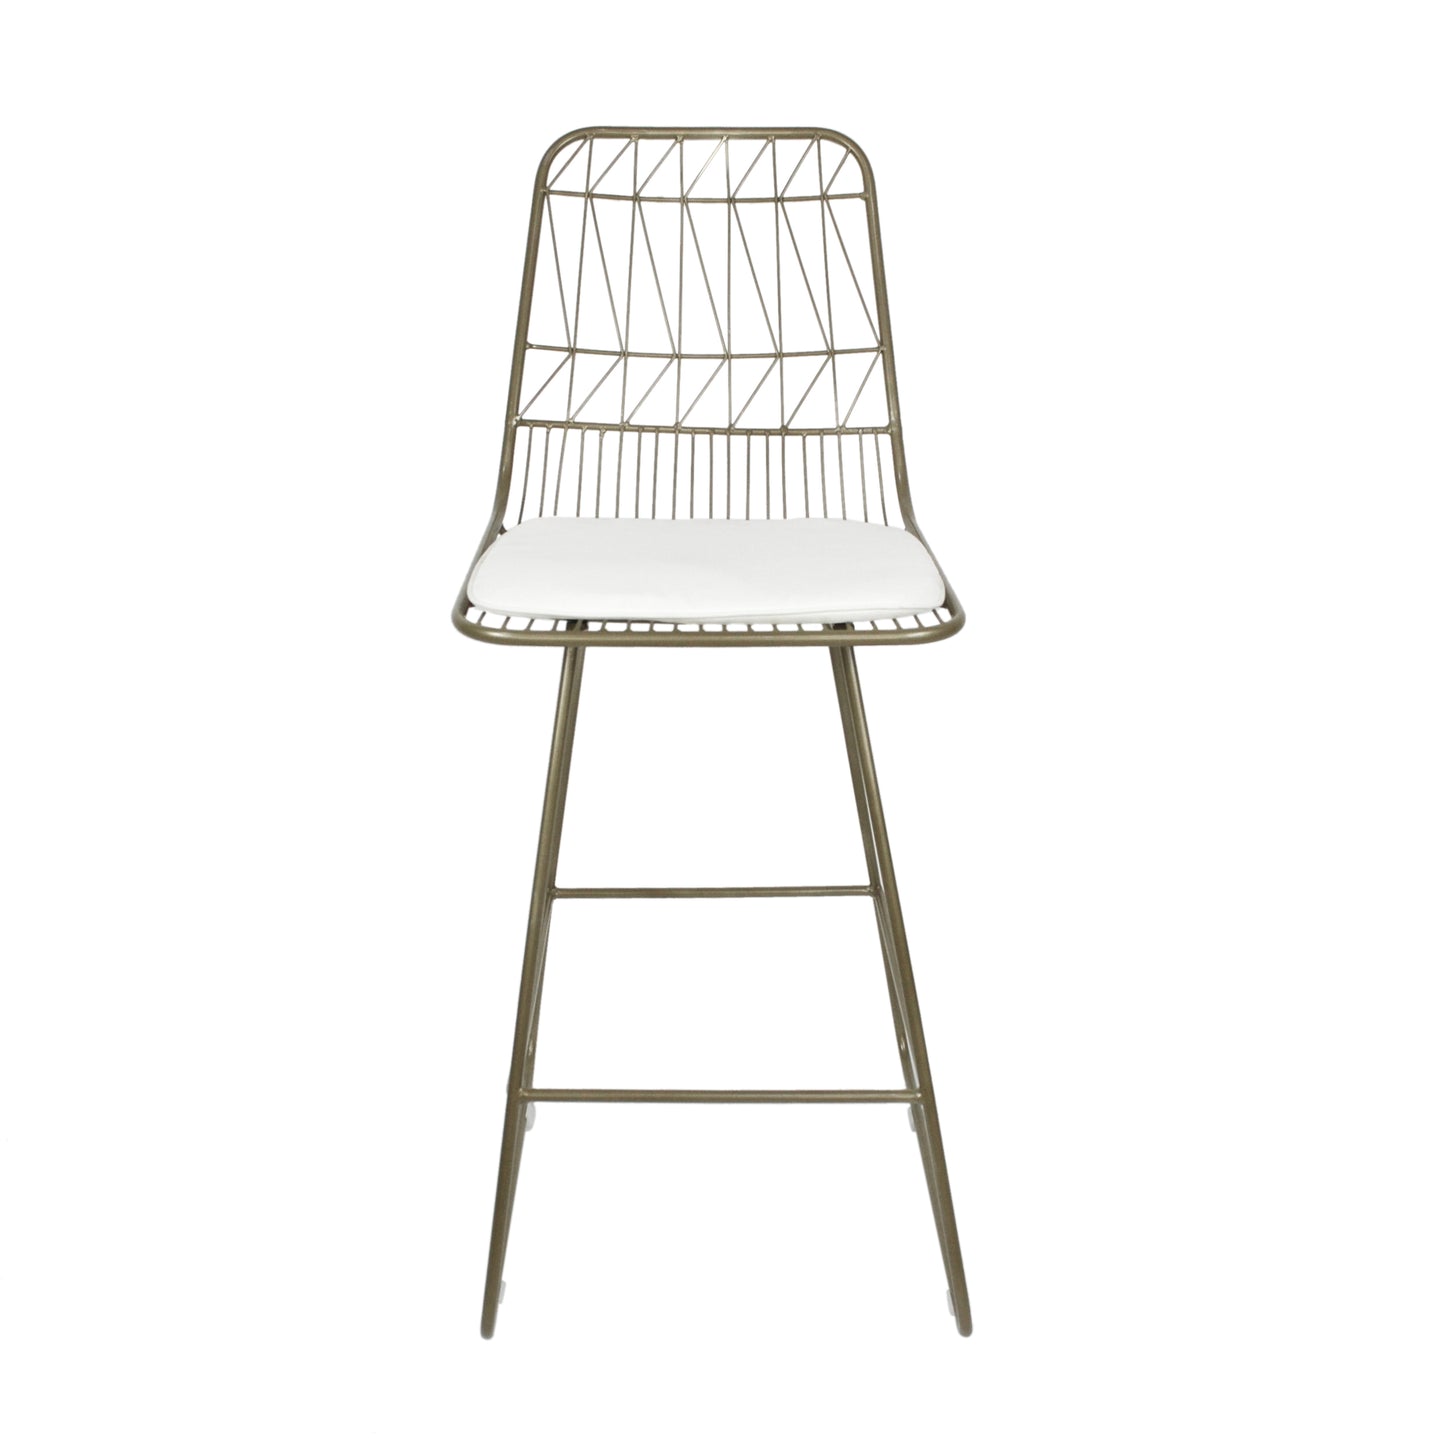 Hedy Outdoor Wire Counter Stools with Cushions (Set of 2)